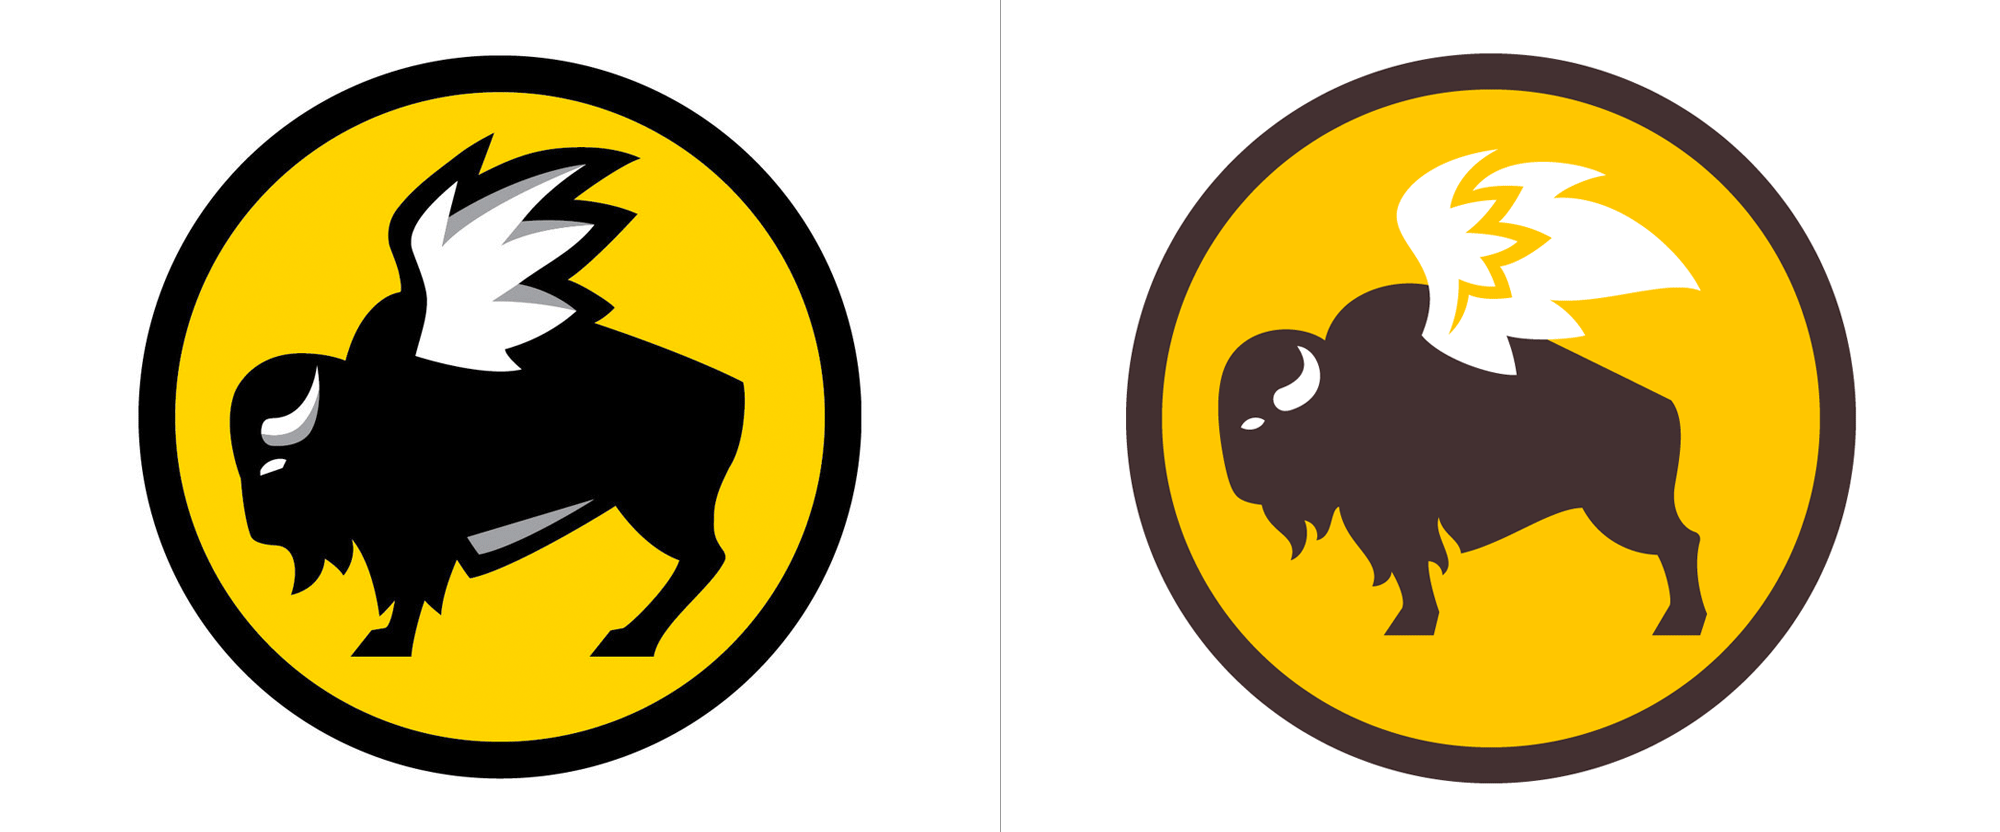 Buffalo Wild Wings Logo - Brand New: New Logo and Identity for Buffalo Wild Wings by Interbrand